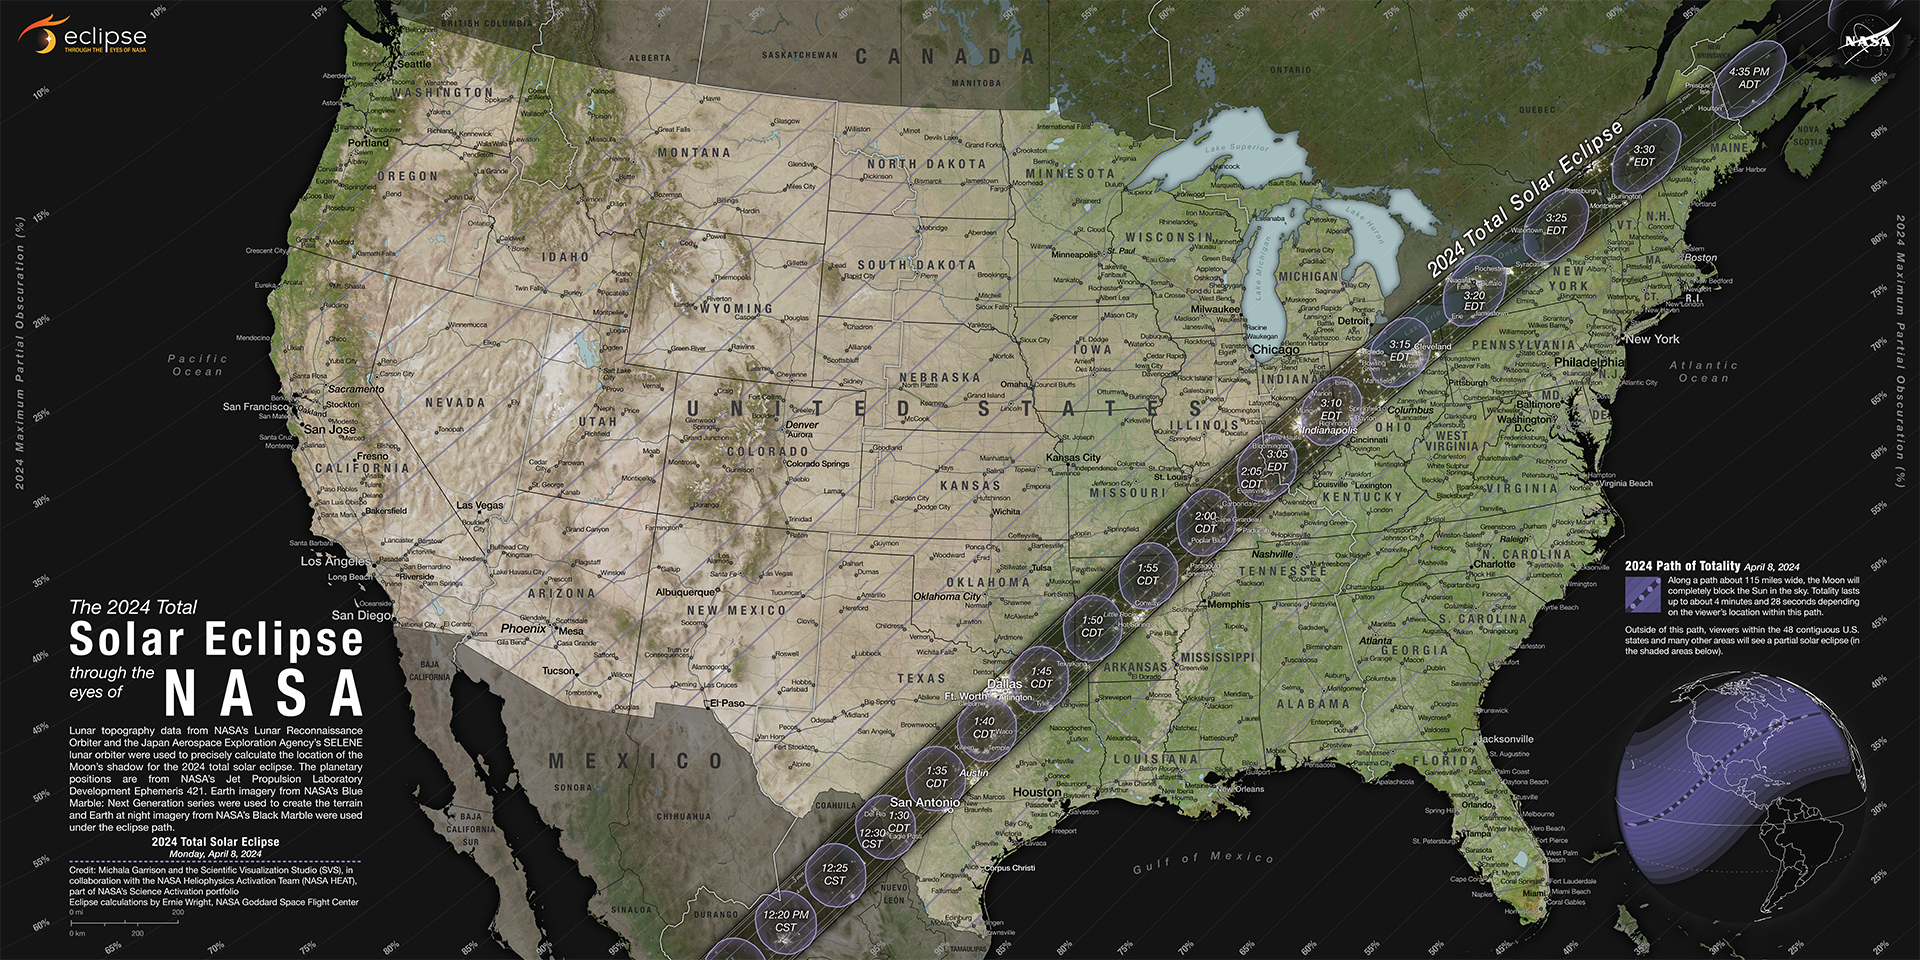 Solar eclipse 2024 Time, duration, and how to watch it live online